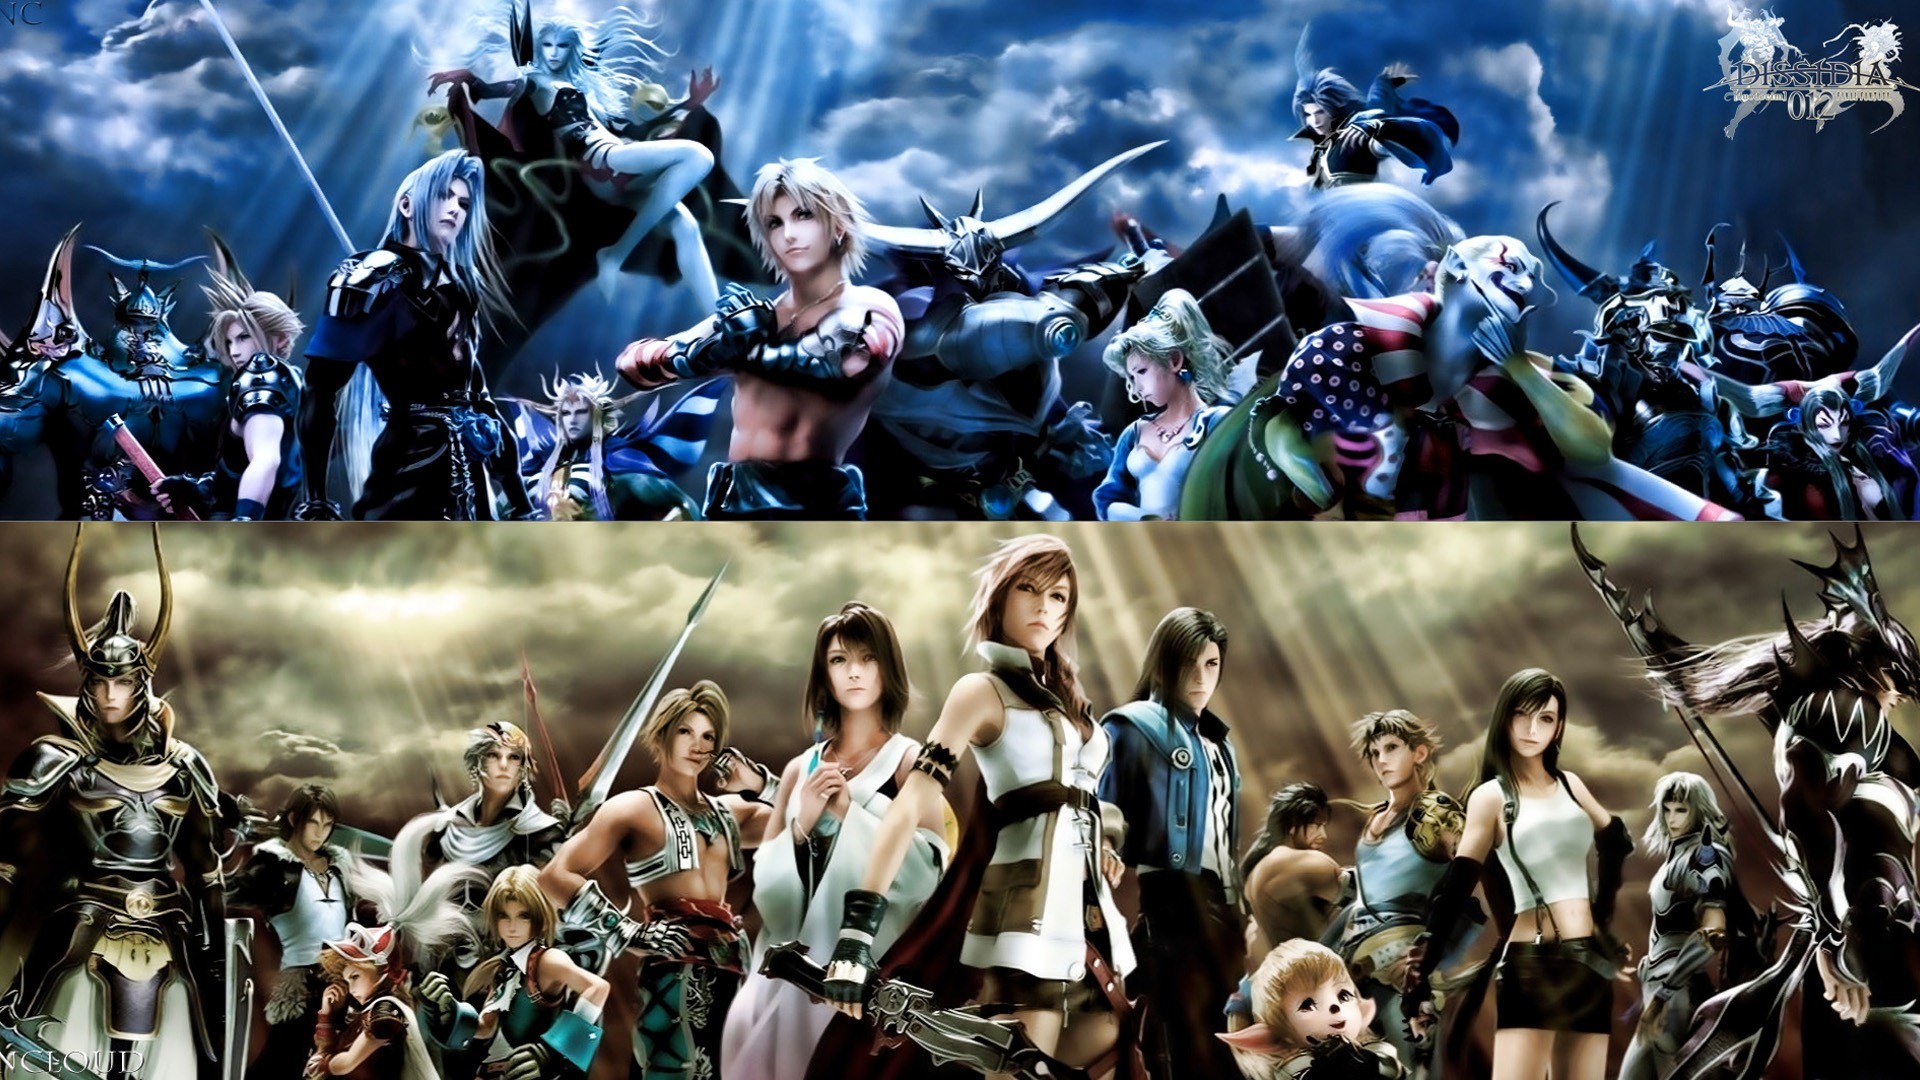 Final Fantasy X Wallpapers Hd 77 Images